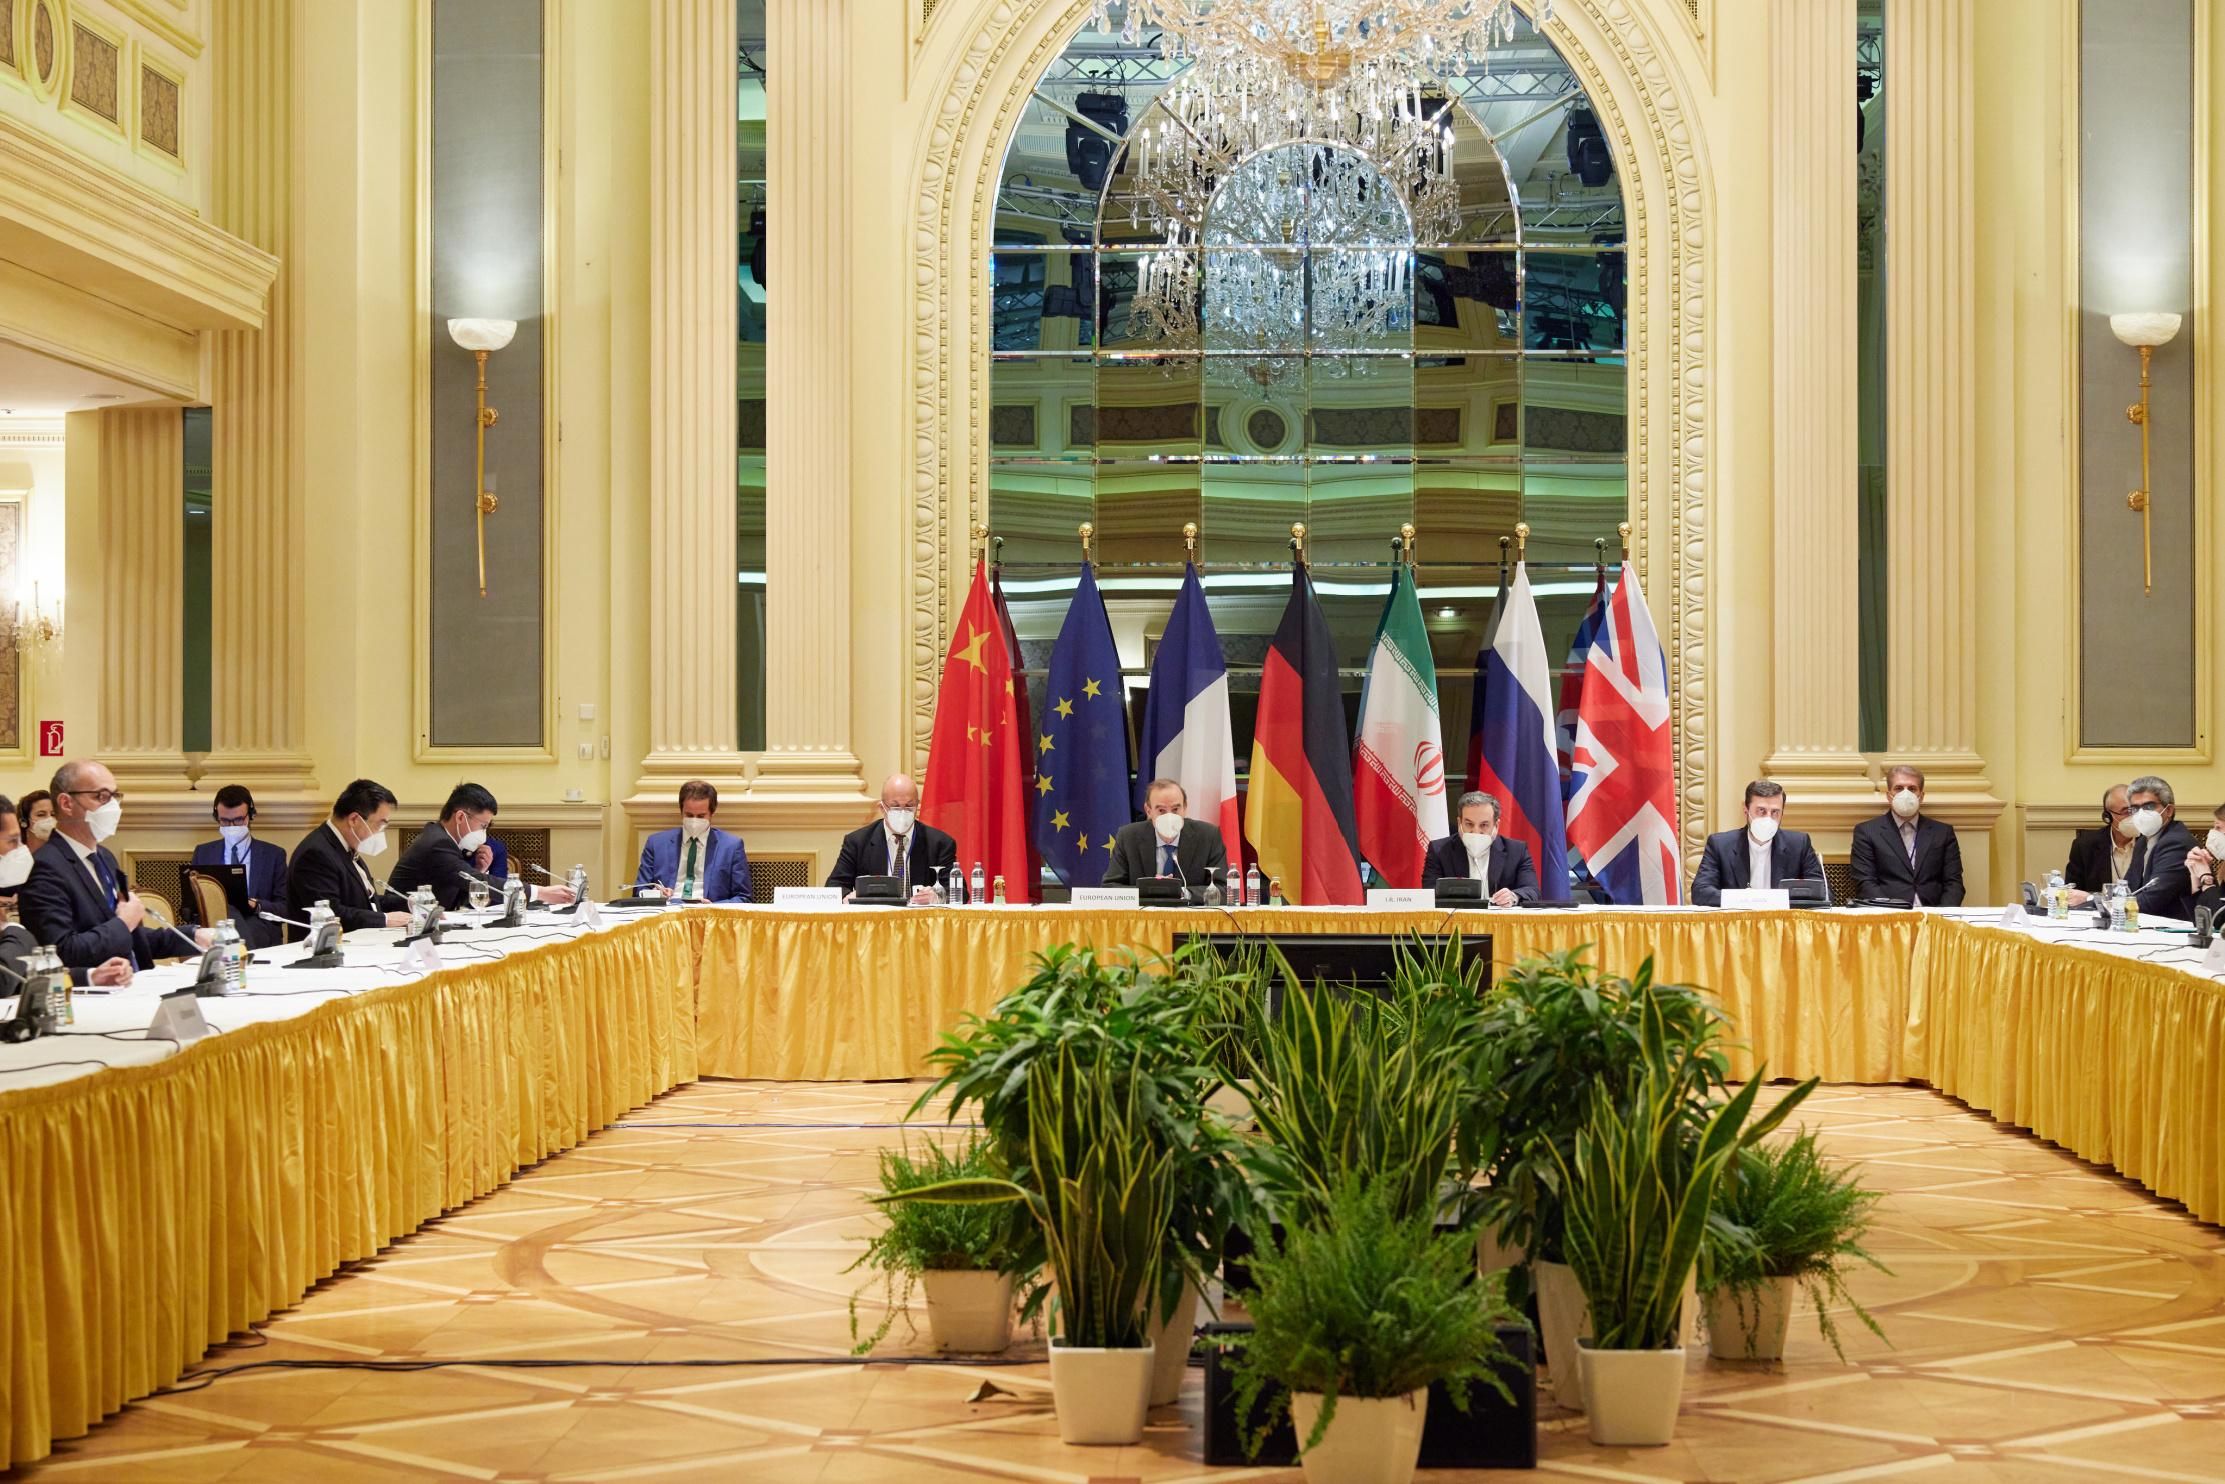 Negotiations to restore the Iran nuclear deal were held in Vienna on April 15, 2021. (Photo: E.U. Delegation in Vienna/Handout/Anadolu Agency via Getty Images)